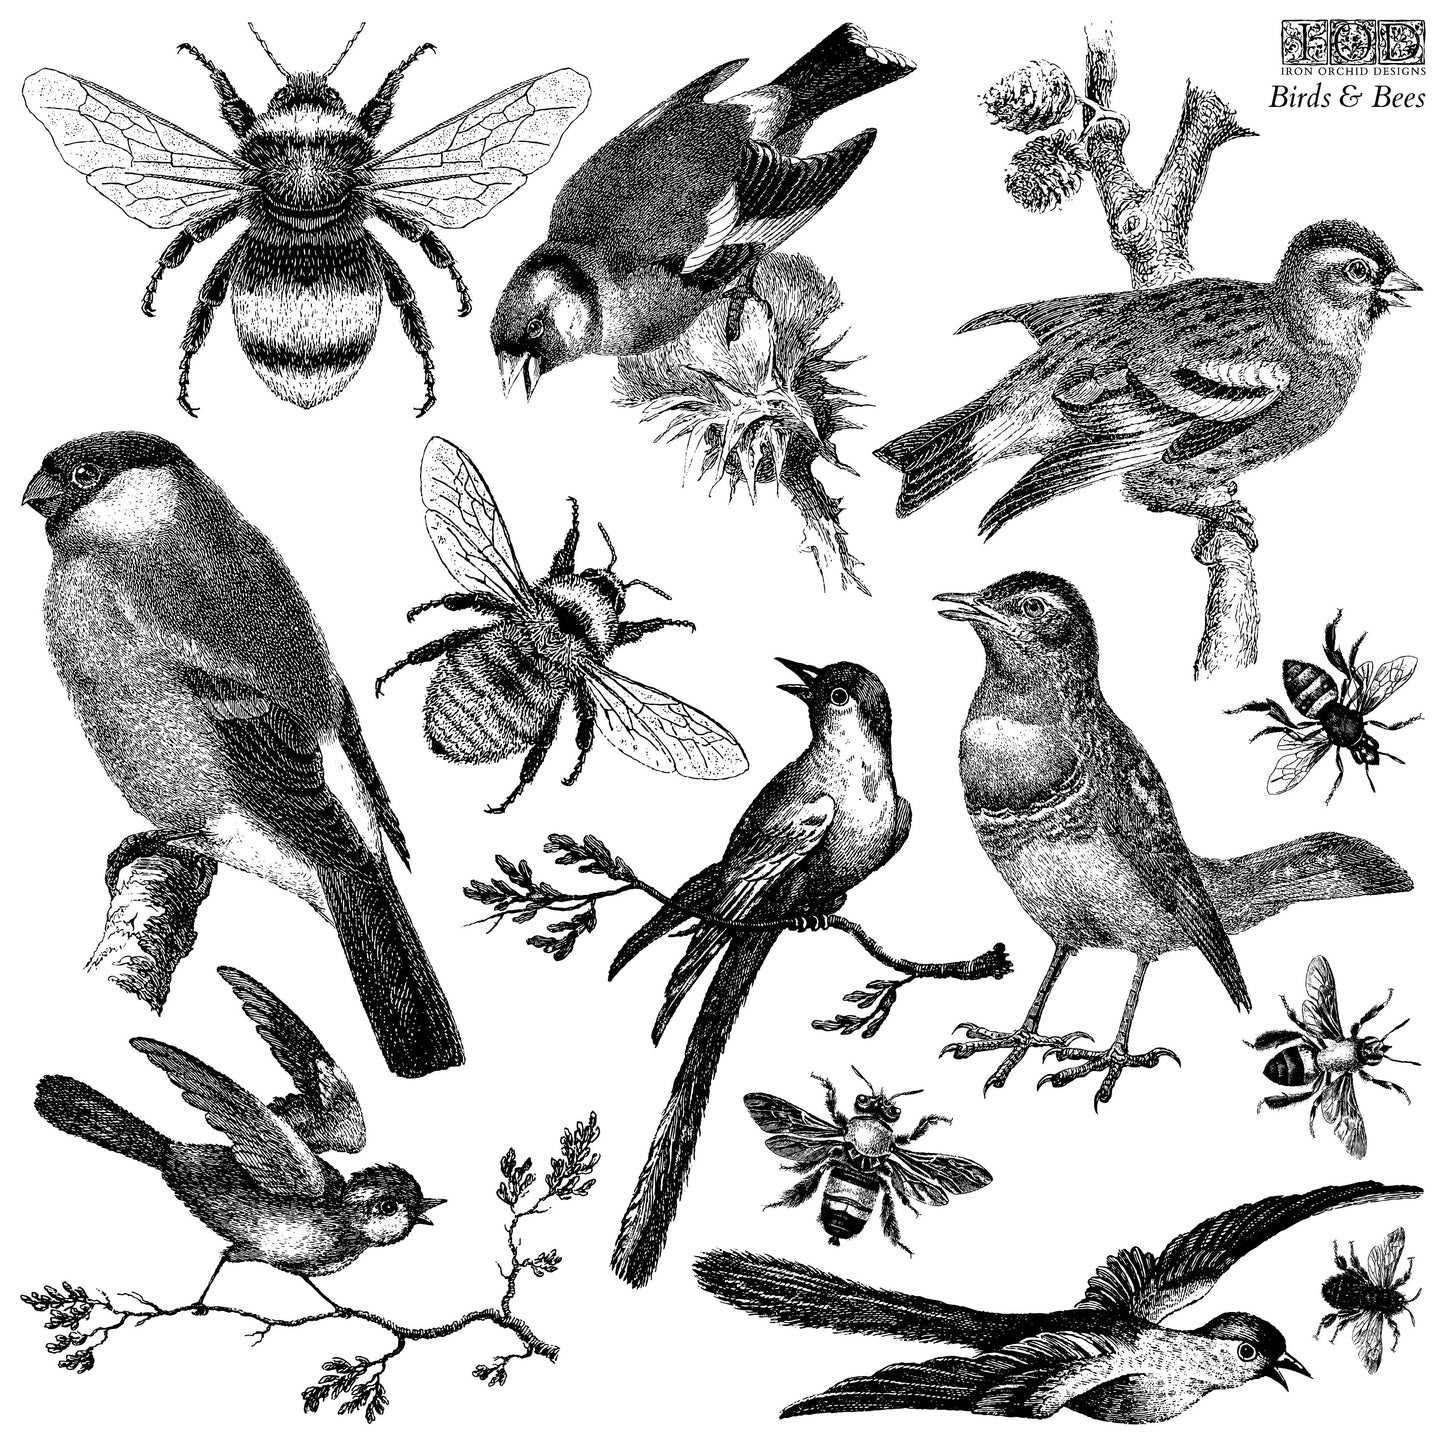 Birds & Bees 12 x 12 IOD stamp - by Iron Orchid Designs - New Release